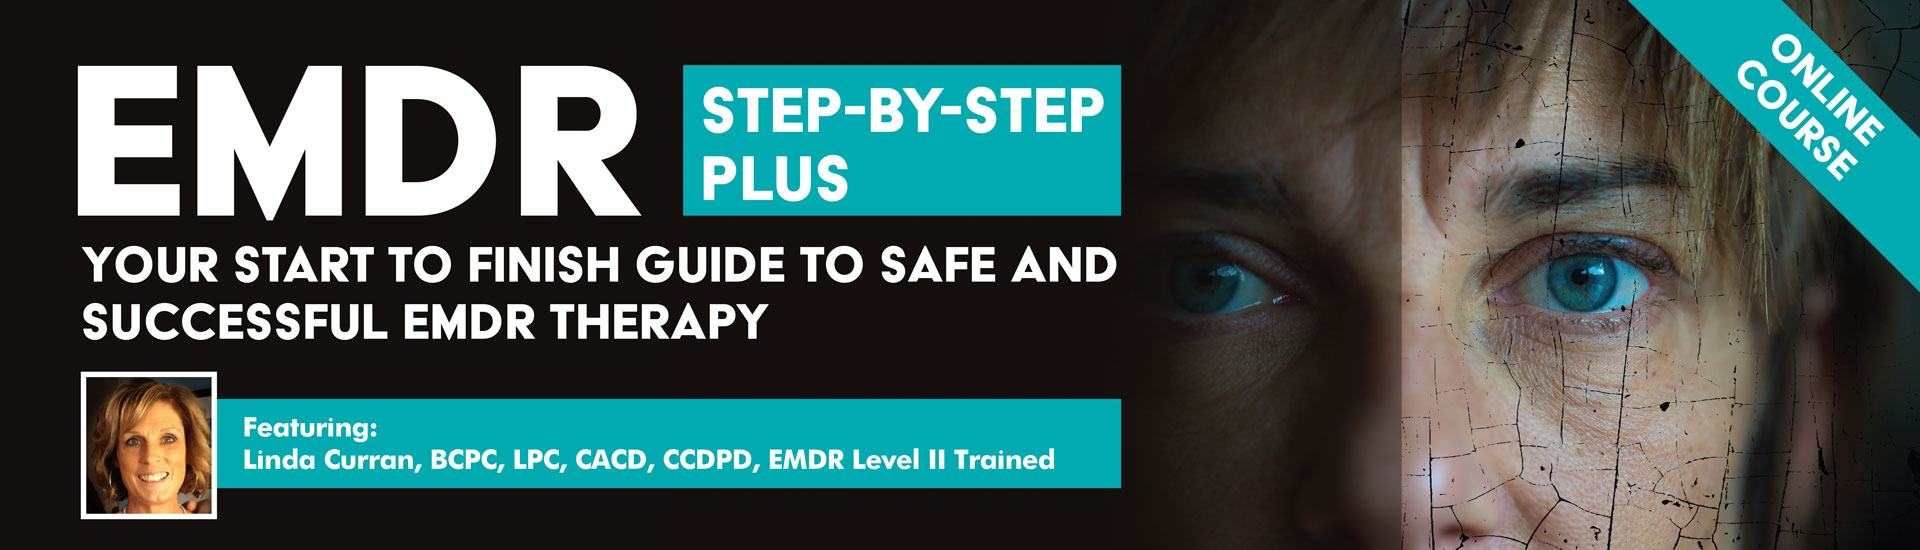 EMDR Step by Step PLUS: Your start to finish guide to safe and successful EMDR therapy